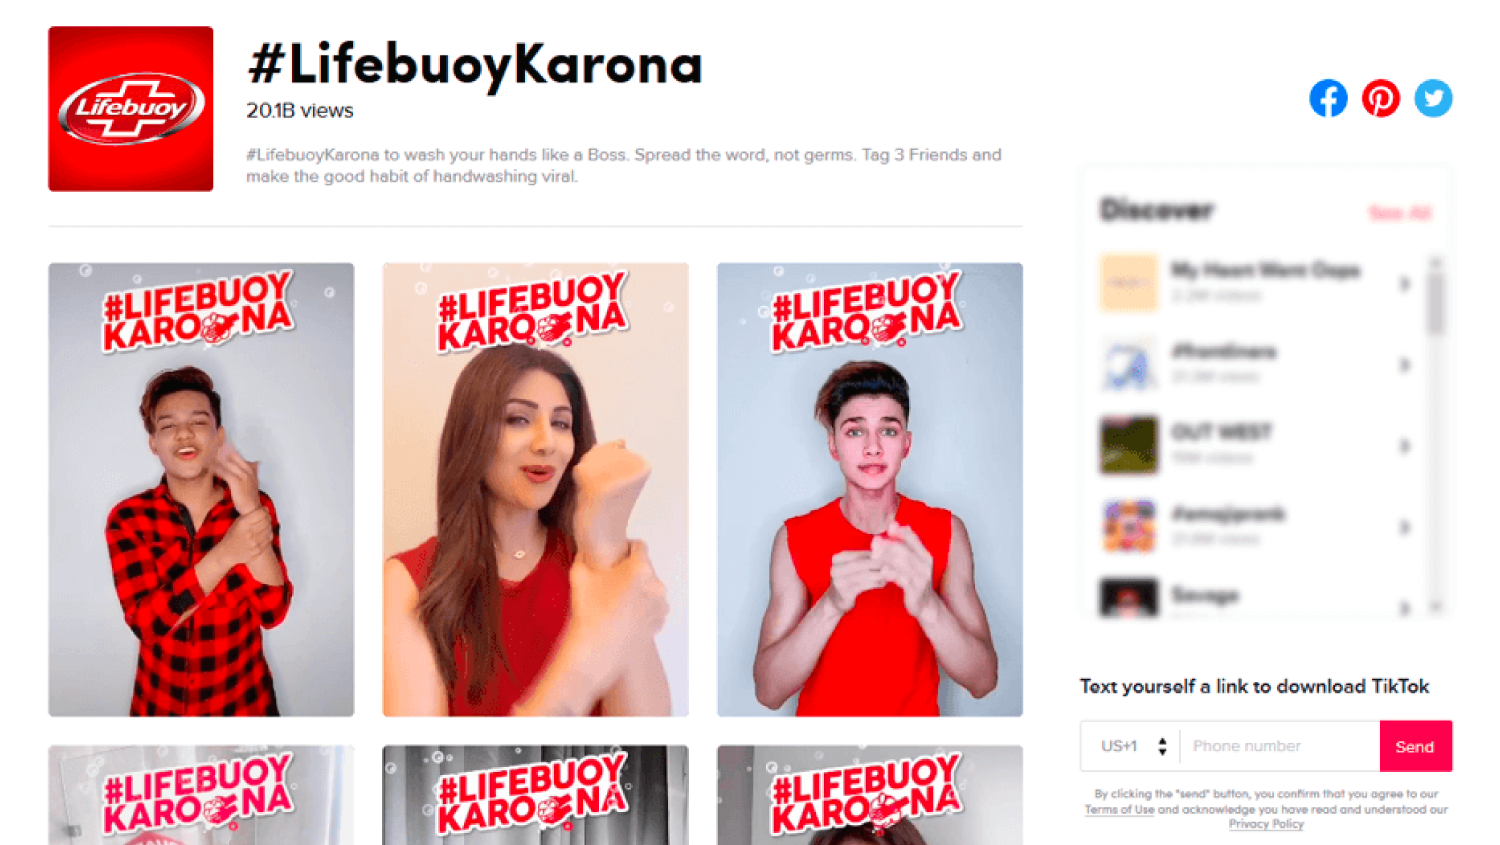 Marketing campaigns that use user-generated content